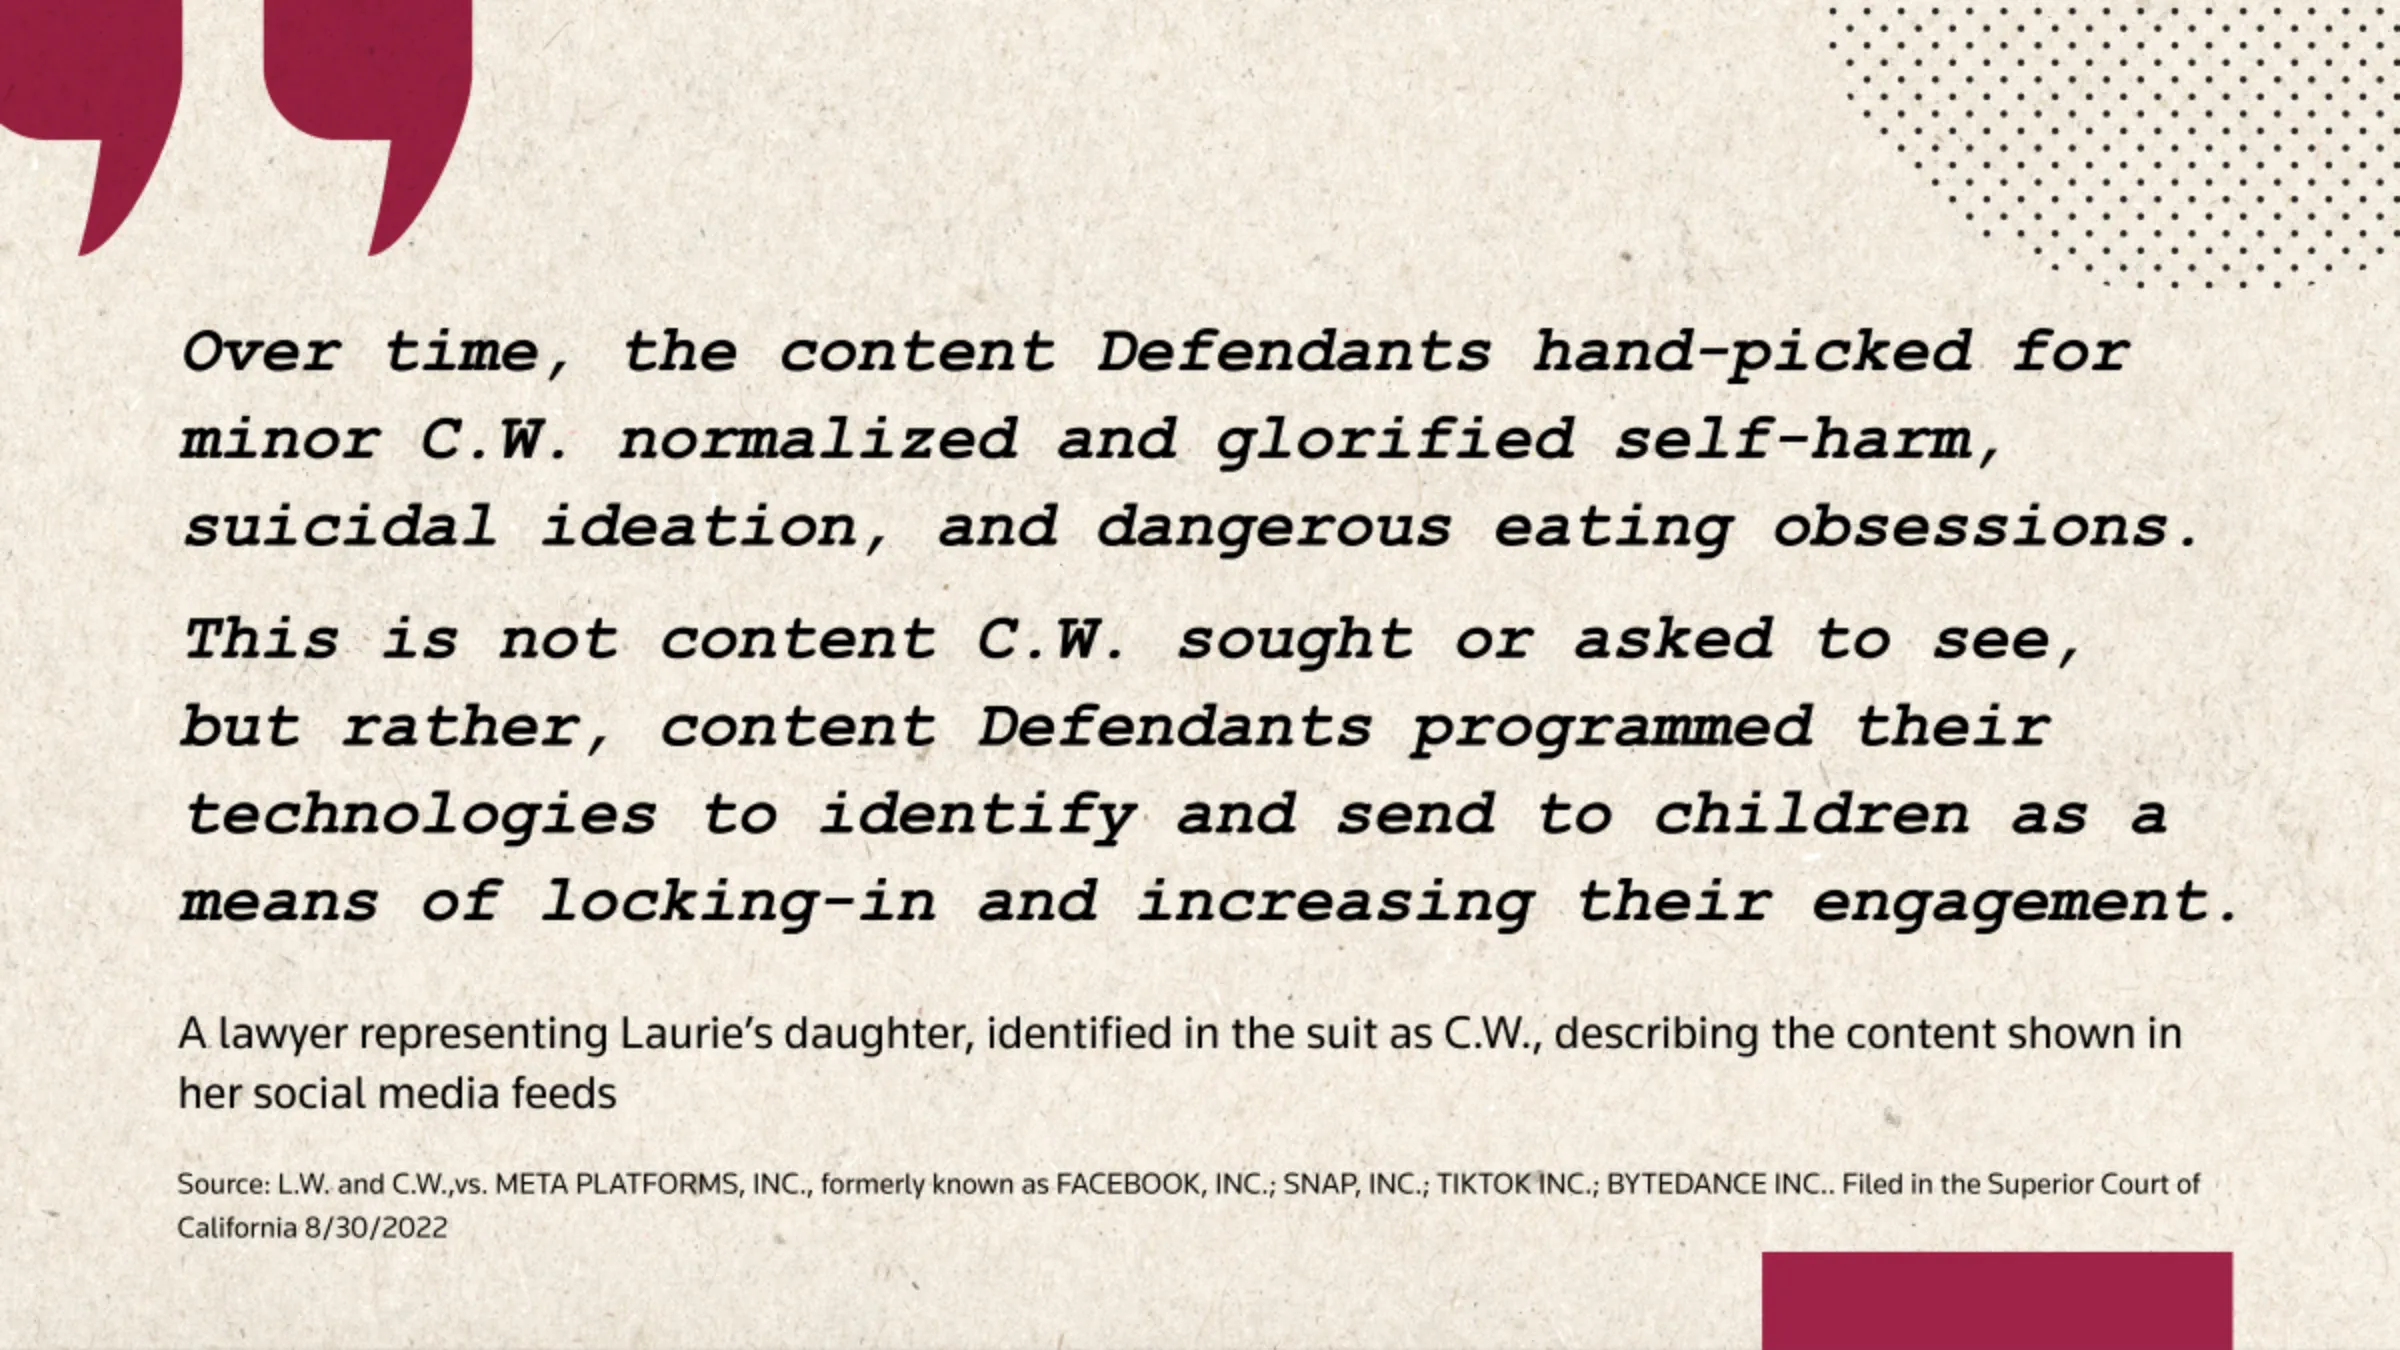 A quote card reads: “Over time, the content Defendants hand-picked for minor C.W. normalized and
glorified self-harm, suicidal ideation, and dangerous eating obsessions.
 This is not content C.W. sought or asked to see, but rather, content Defendants programmed their technologies to identify and send to children as a means of locking-in and increasing their engagement.”
- A lawyer representing Laurie's daughter, identified in the suit as C.W., describing the content shown in her social media feeds.
L.W. and C.W.,vs. META PLATFORMS, INC., formerly known as FACEBOOK, INC.; SNAP, INC.; TIKTOK INC.; BYTEDANCE INC.